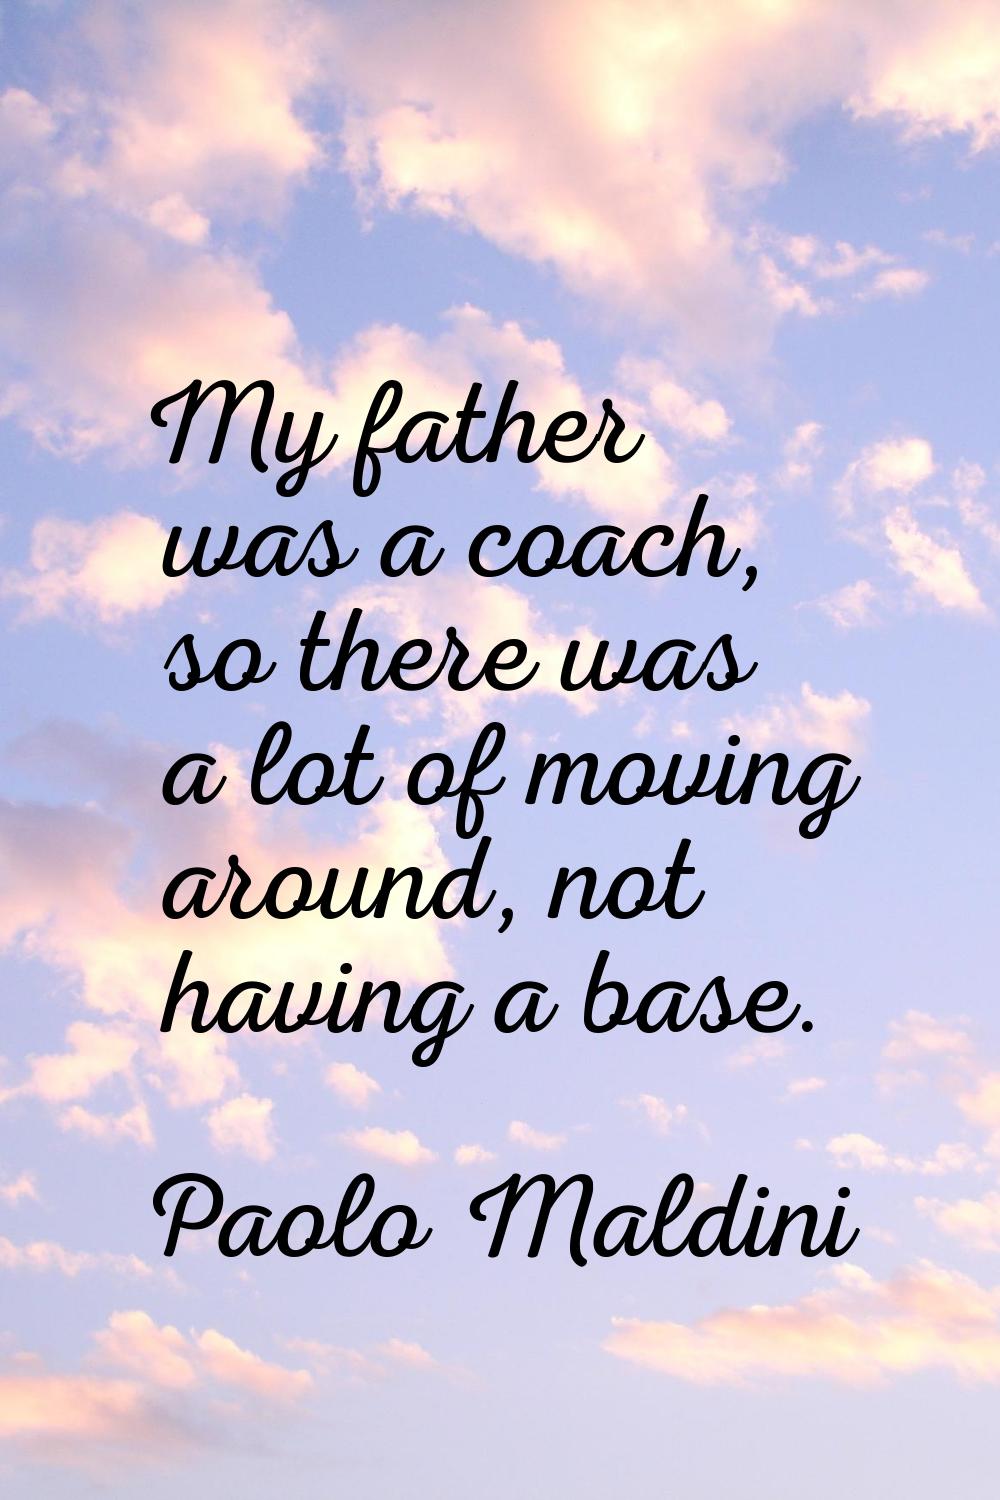 My father was a coach, so there was a lot of moving around, not having a base.